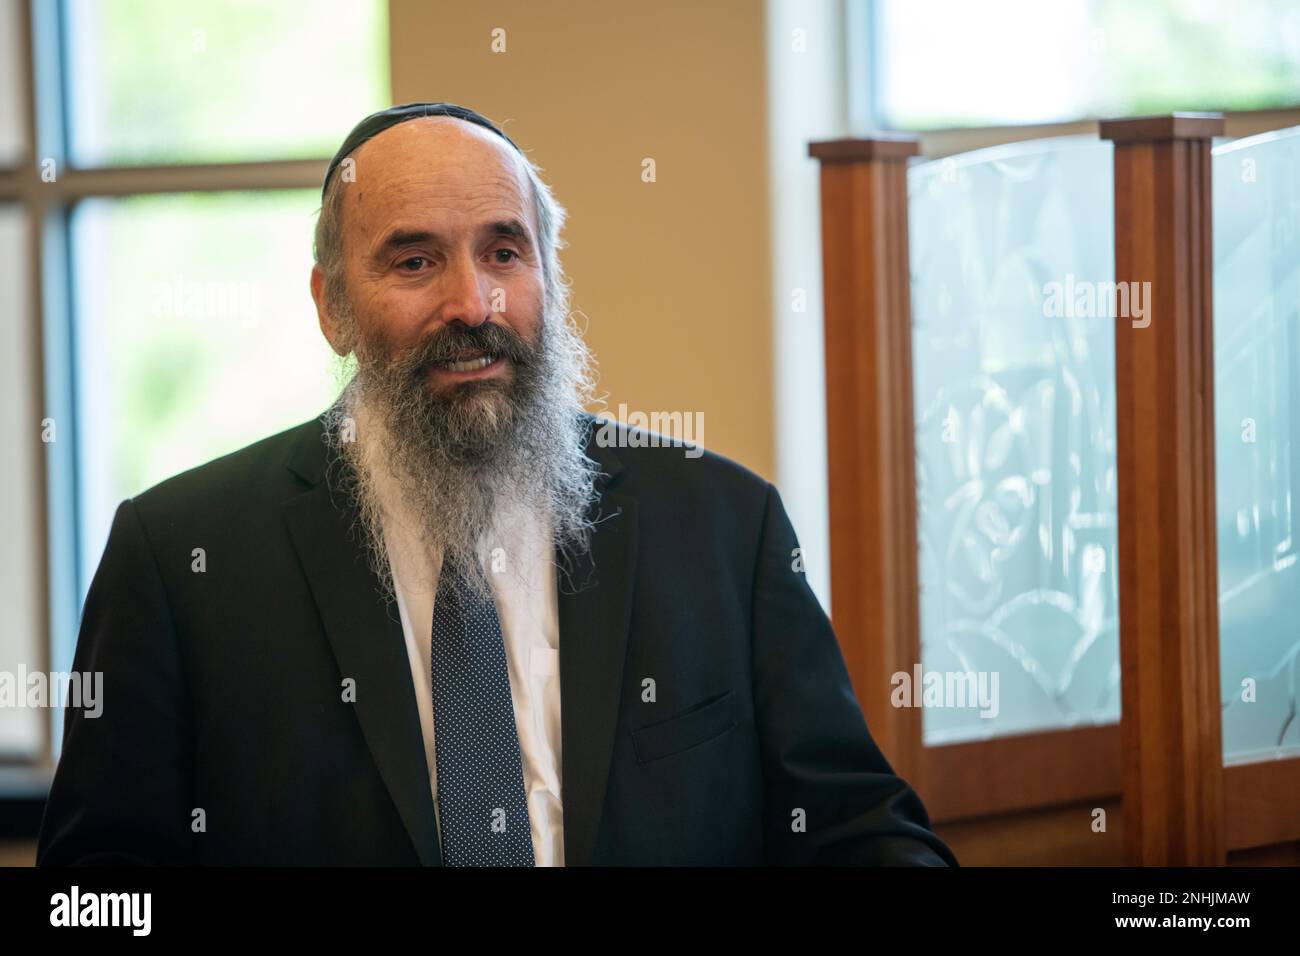 Rabbi Tuvia Teldon provides a few words during the awards ceremony of his father, U.S. Army Air Corps 1st Lt. Gerald Teldon, retired, recognizing his honorable service as a pilot on July 29, 2022, at the Chabad Center for Jewish Life and Learning, San Antonio, Texas. Teldon, born in Bronx, N.Y., in 1924, joined the military in 1944. He completed 62 missions during WWII and the Korean War. Lt. Col. Andrew Stein, 502nd Operations Support Squadron commander, was the presiding officers. The awards presented to Teldon are as follows: the Air Medal; American Campaign Medal; European – African – Midd Stock Photo